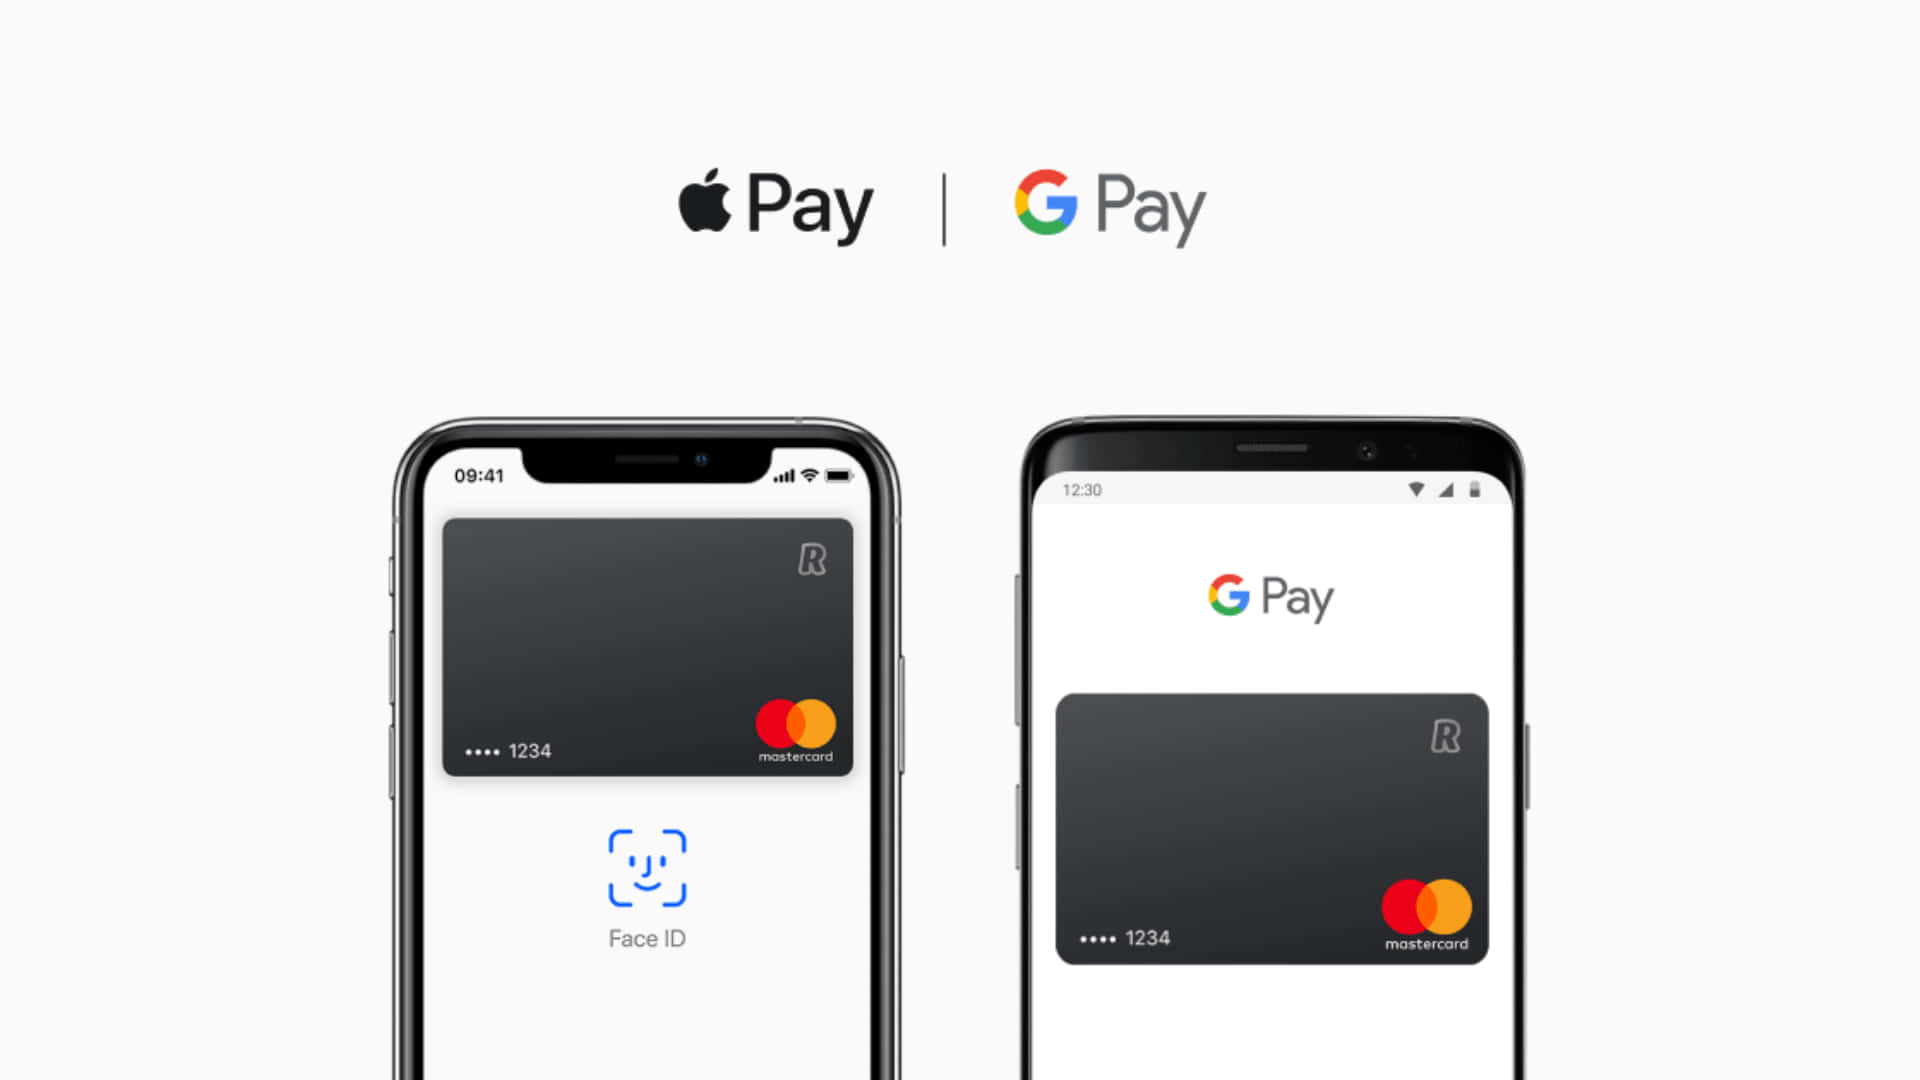 "Make purchases a breeze with Apple Pay"